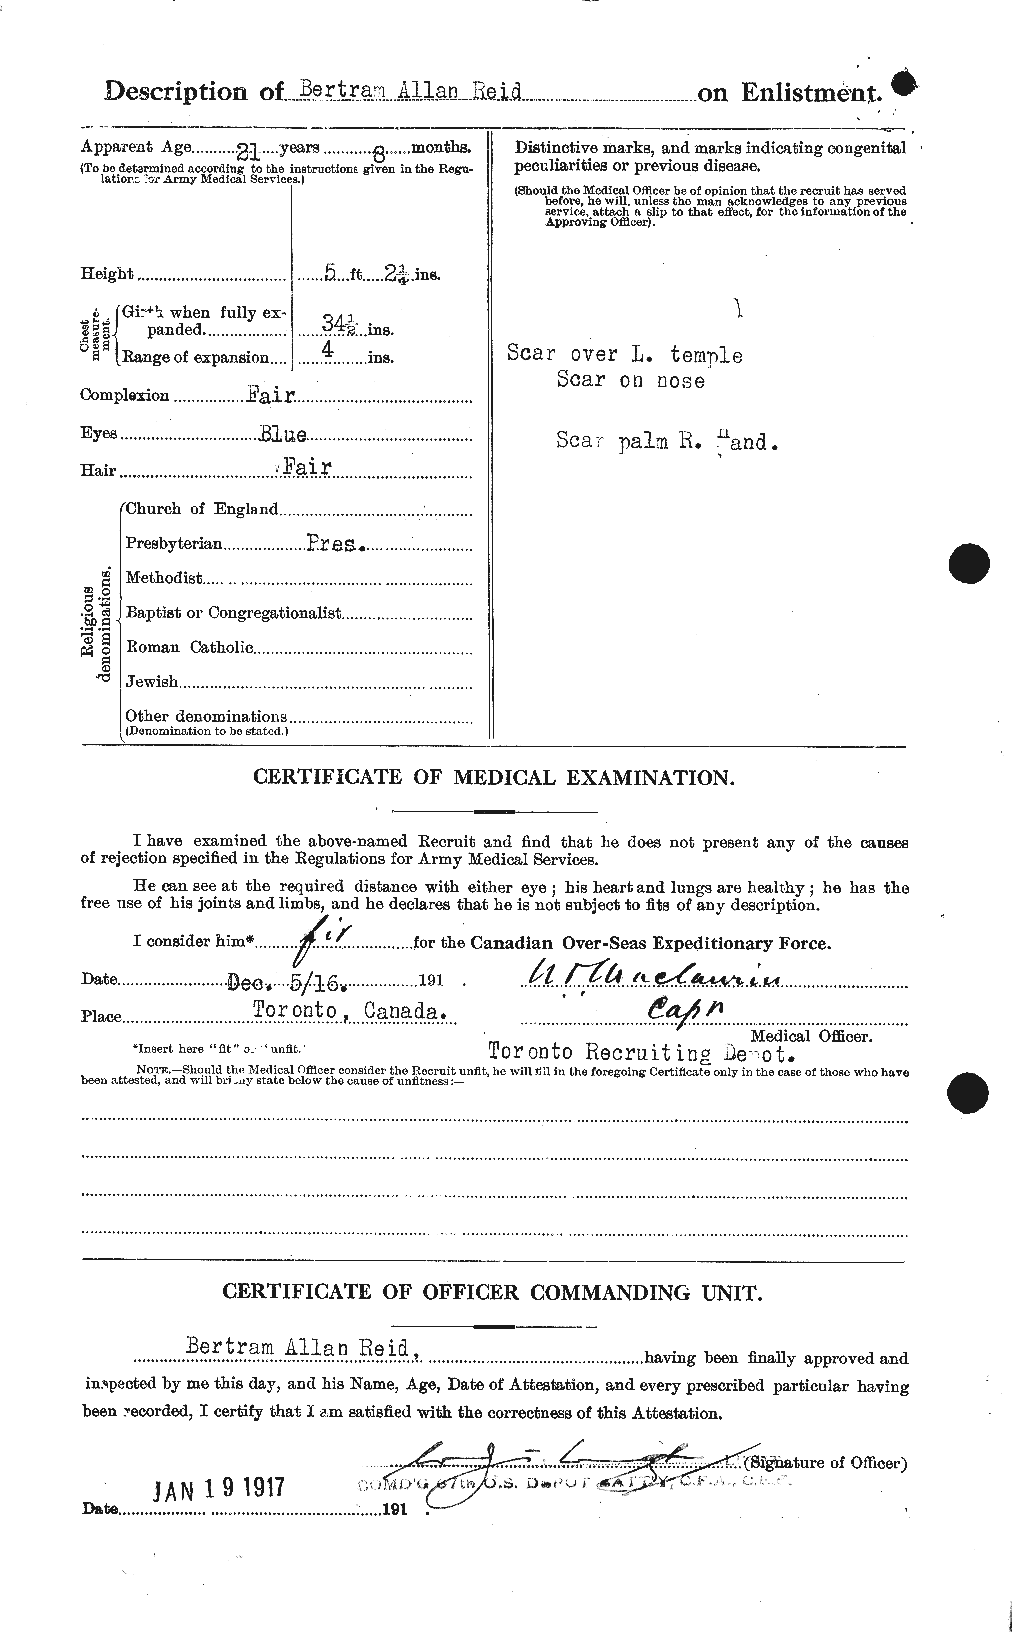 Personnel Records of the First World War - CEF 597859b